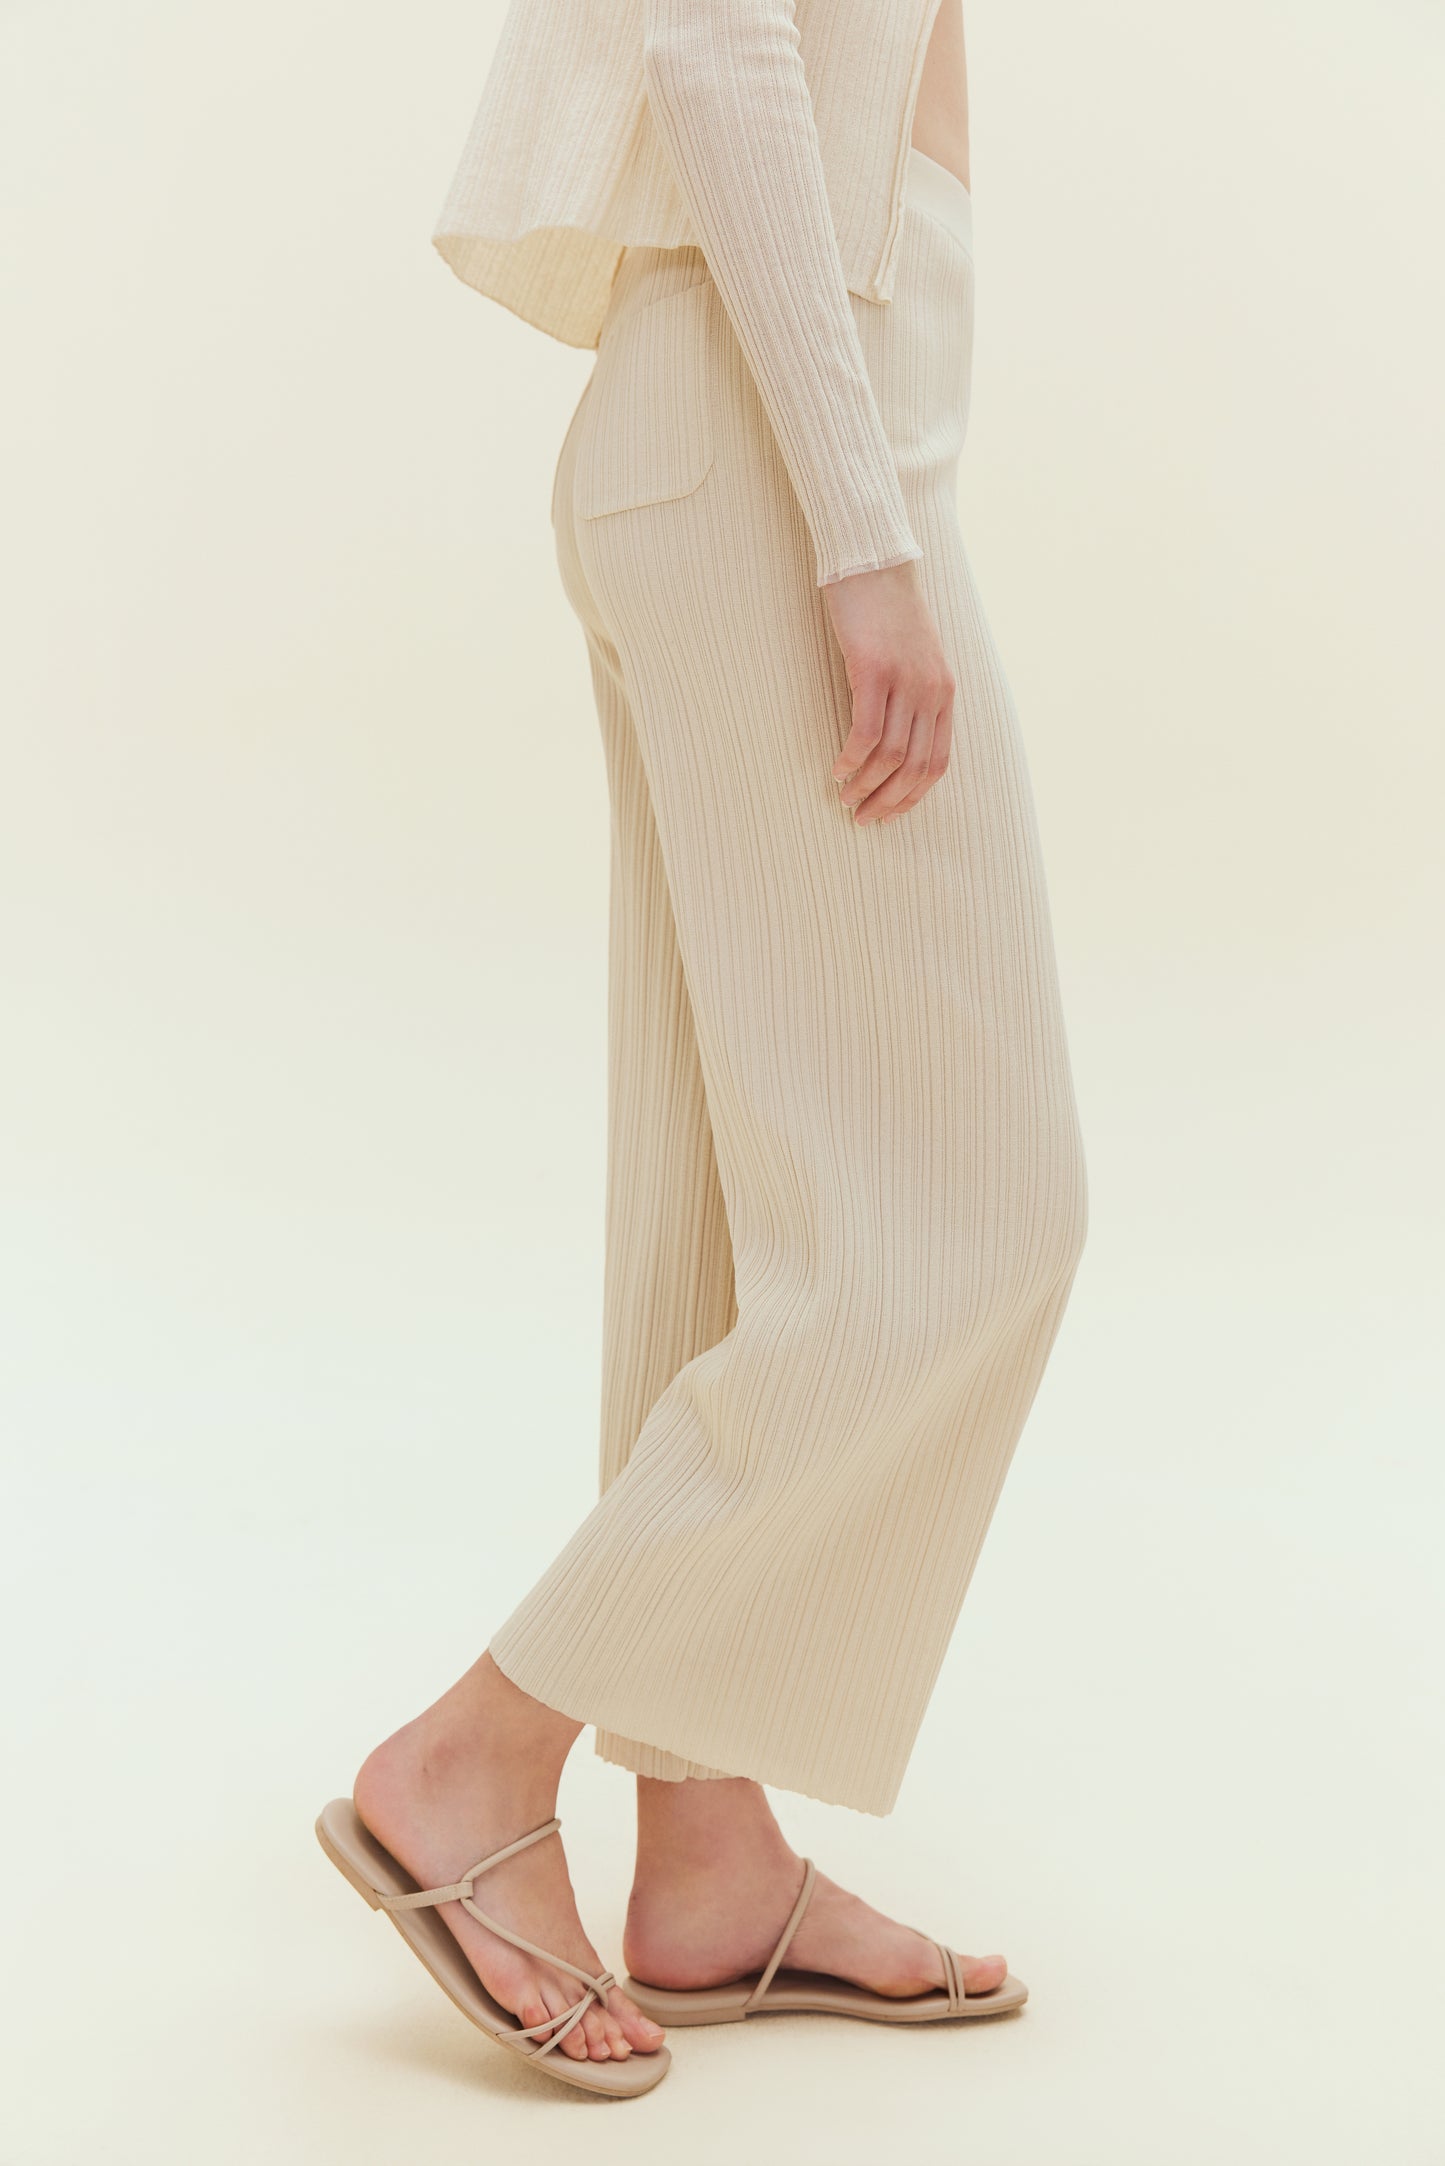 Side view of woman standing wearing off white knit pants